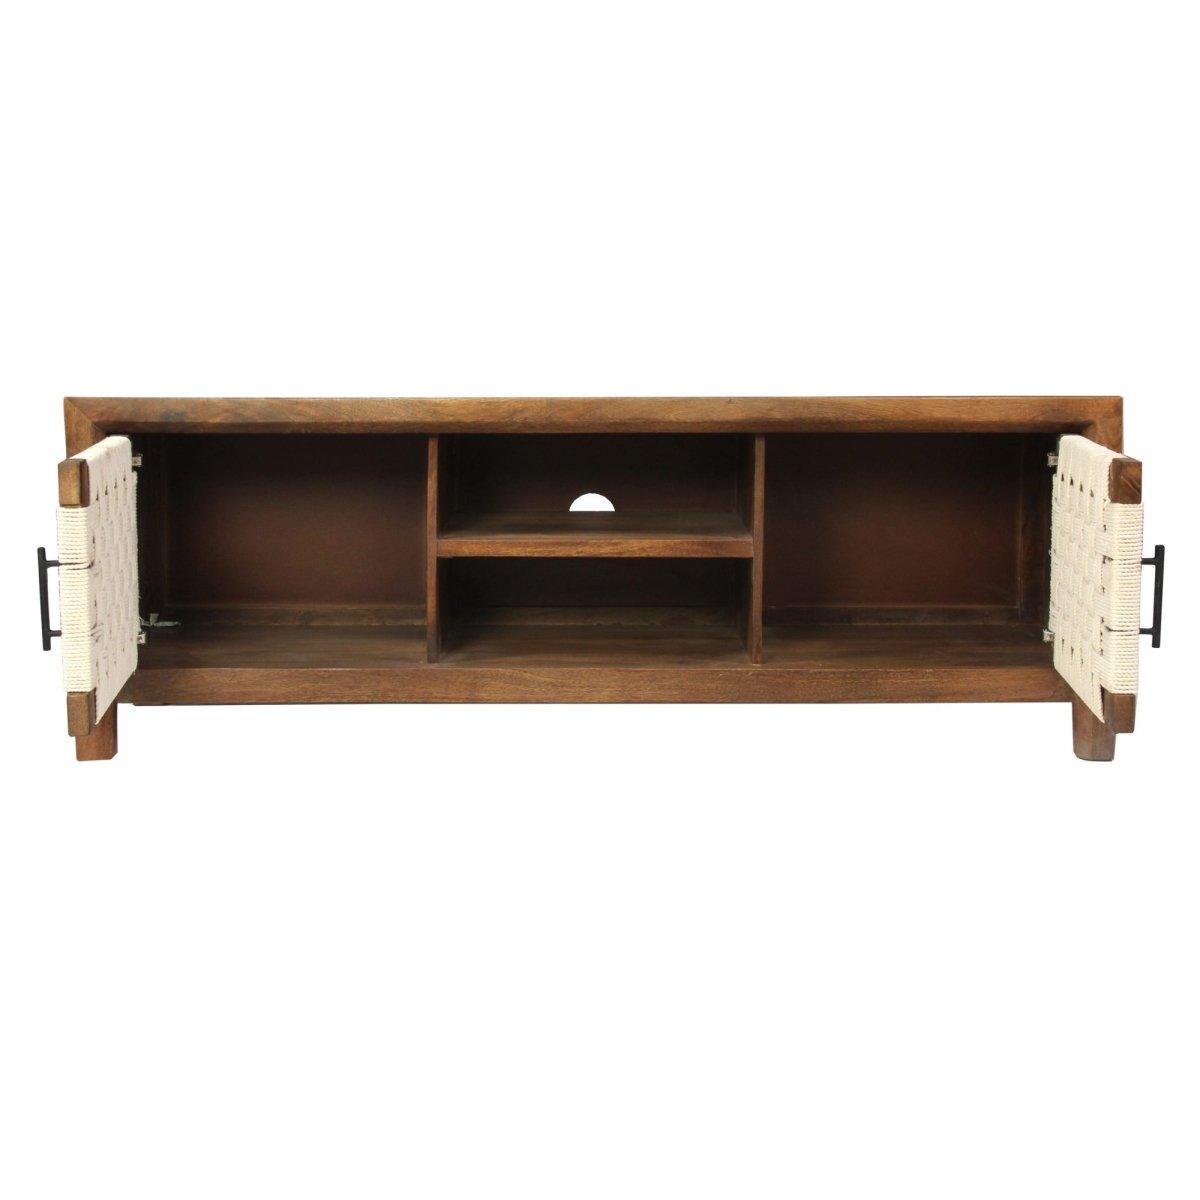 Butler Choco Mango Wood TV Stand - Rustic Furniture Outlet